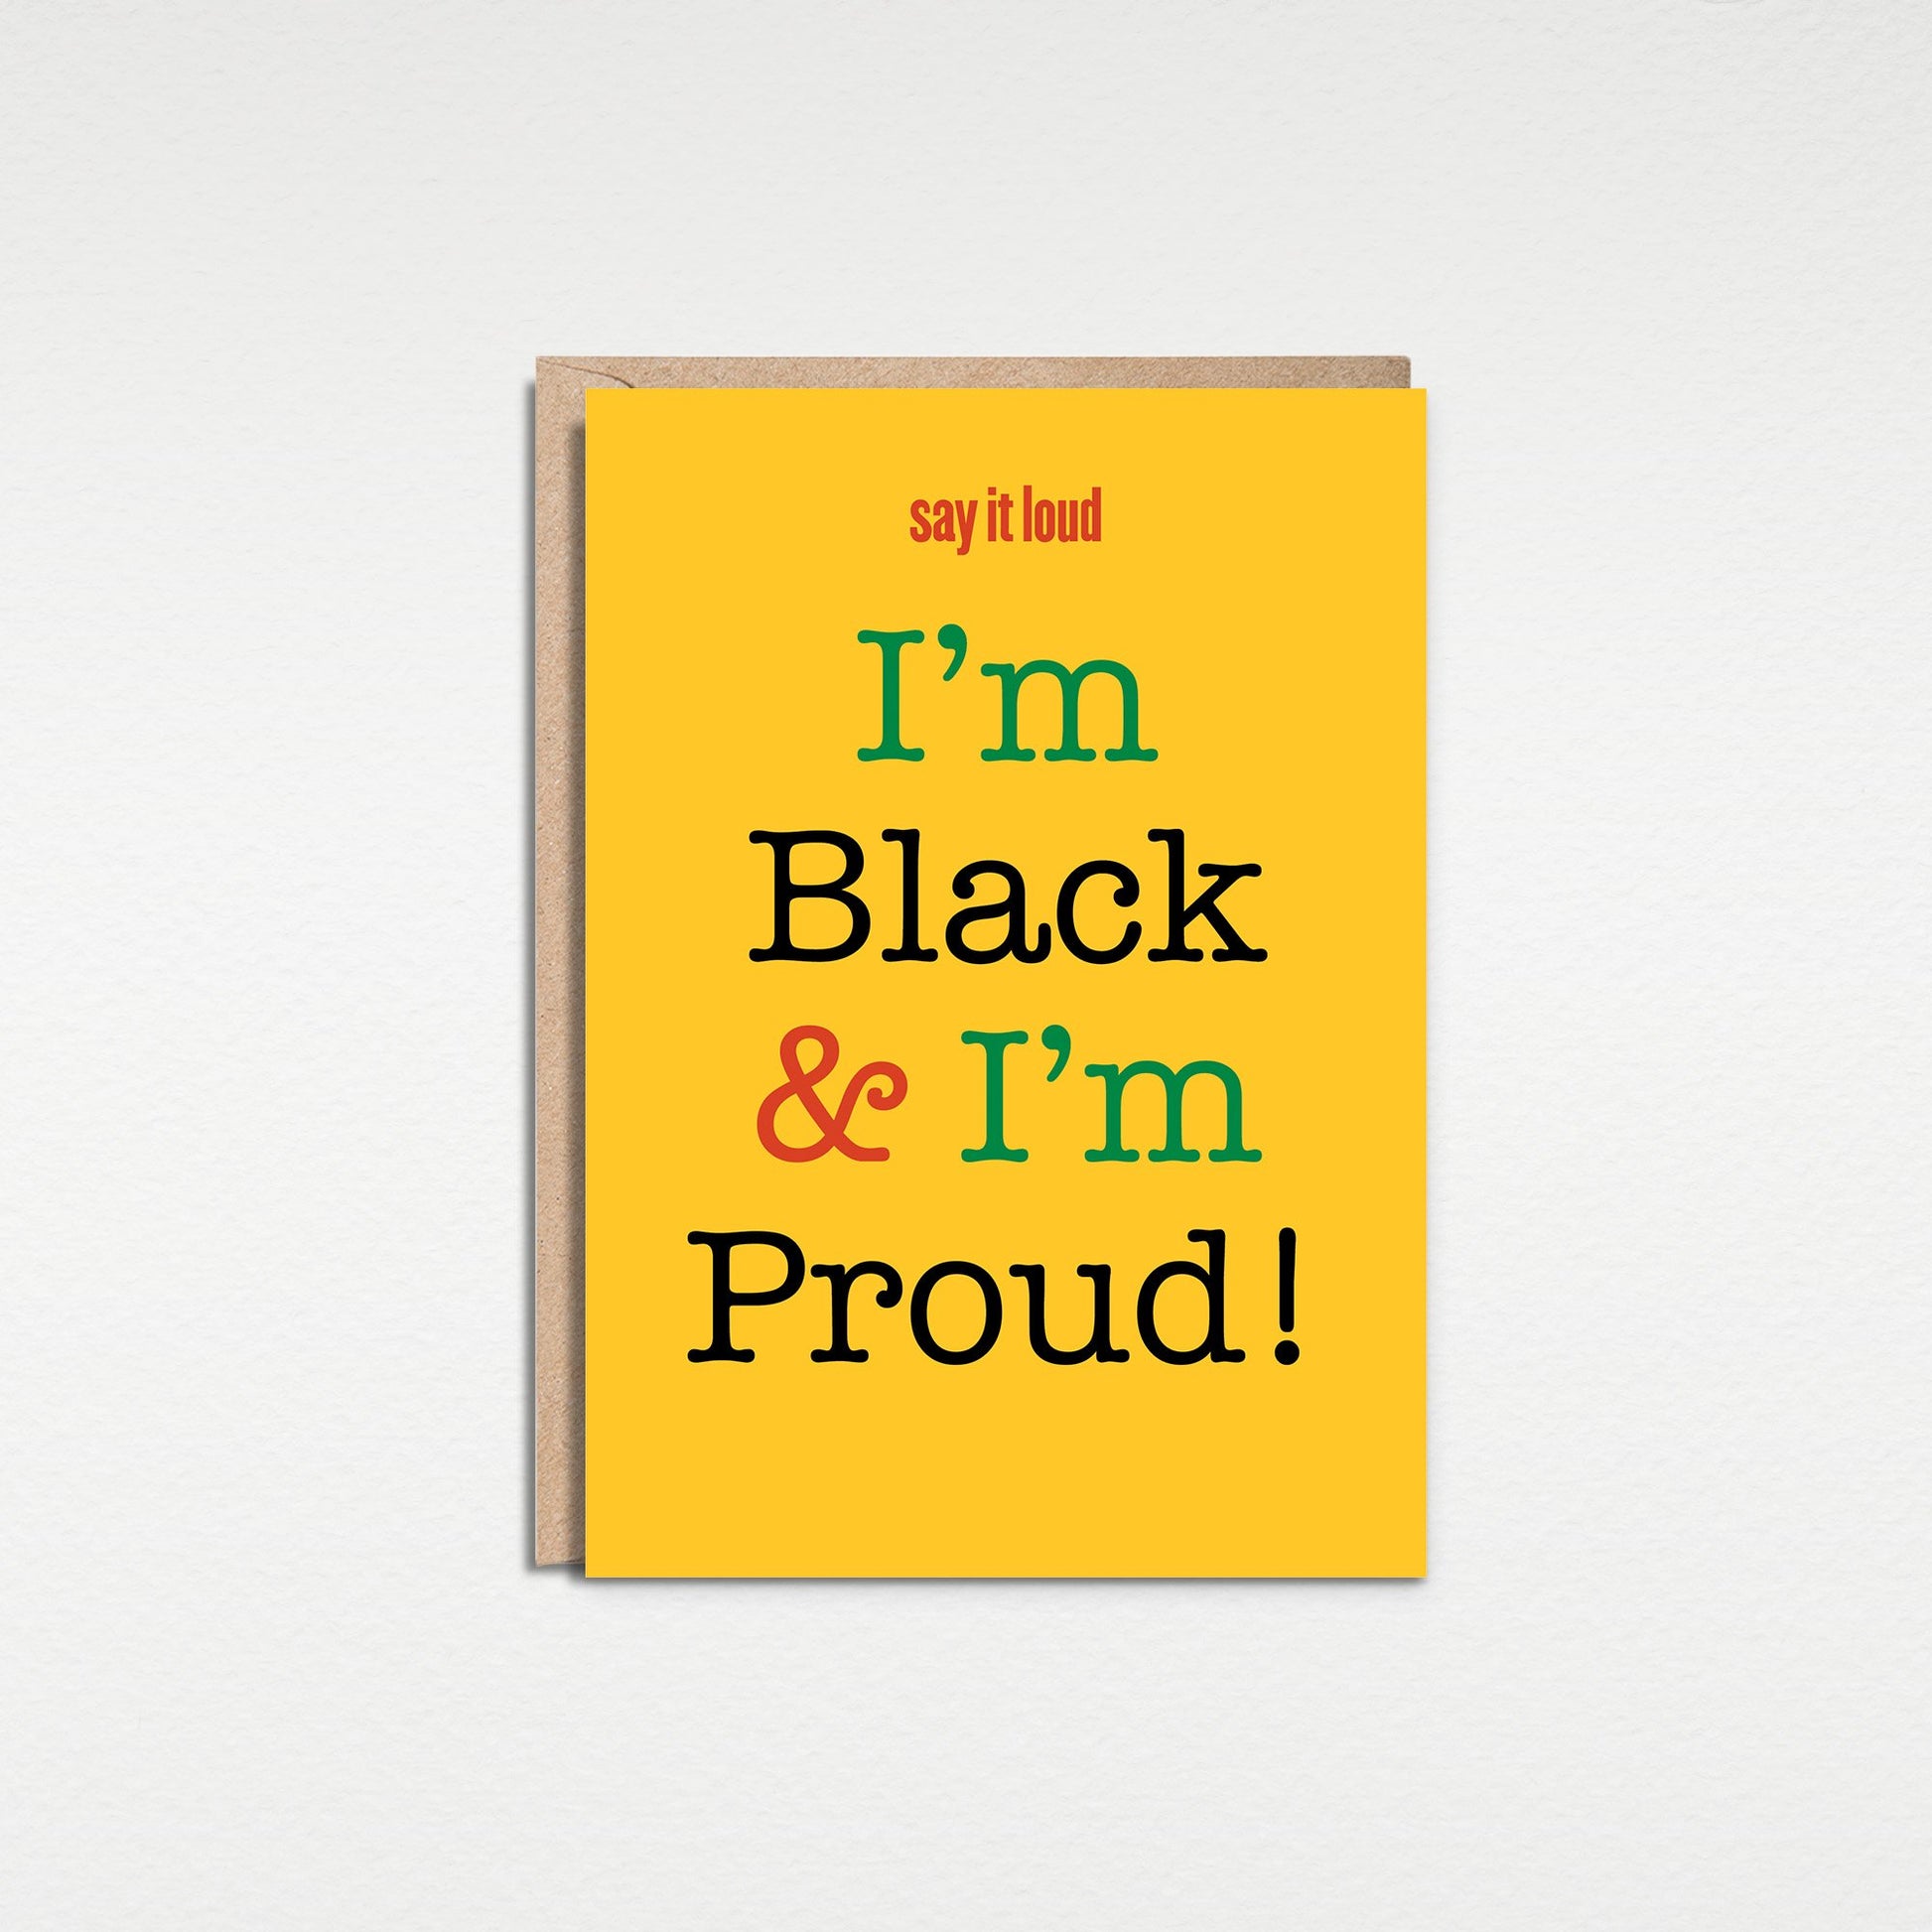 Buy Black and Proud 5x7” Black History Month, African American Pride greeting card from Goods Made By Digitrillnana, Ashley Fletcher. Black Woman Owned. Perfect card for any ocasion!